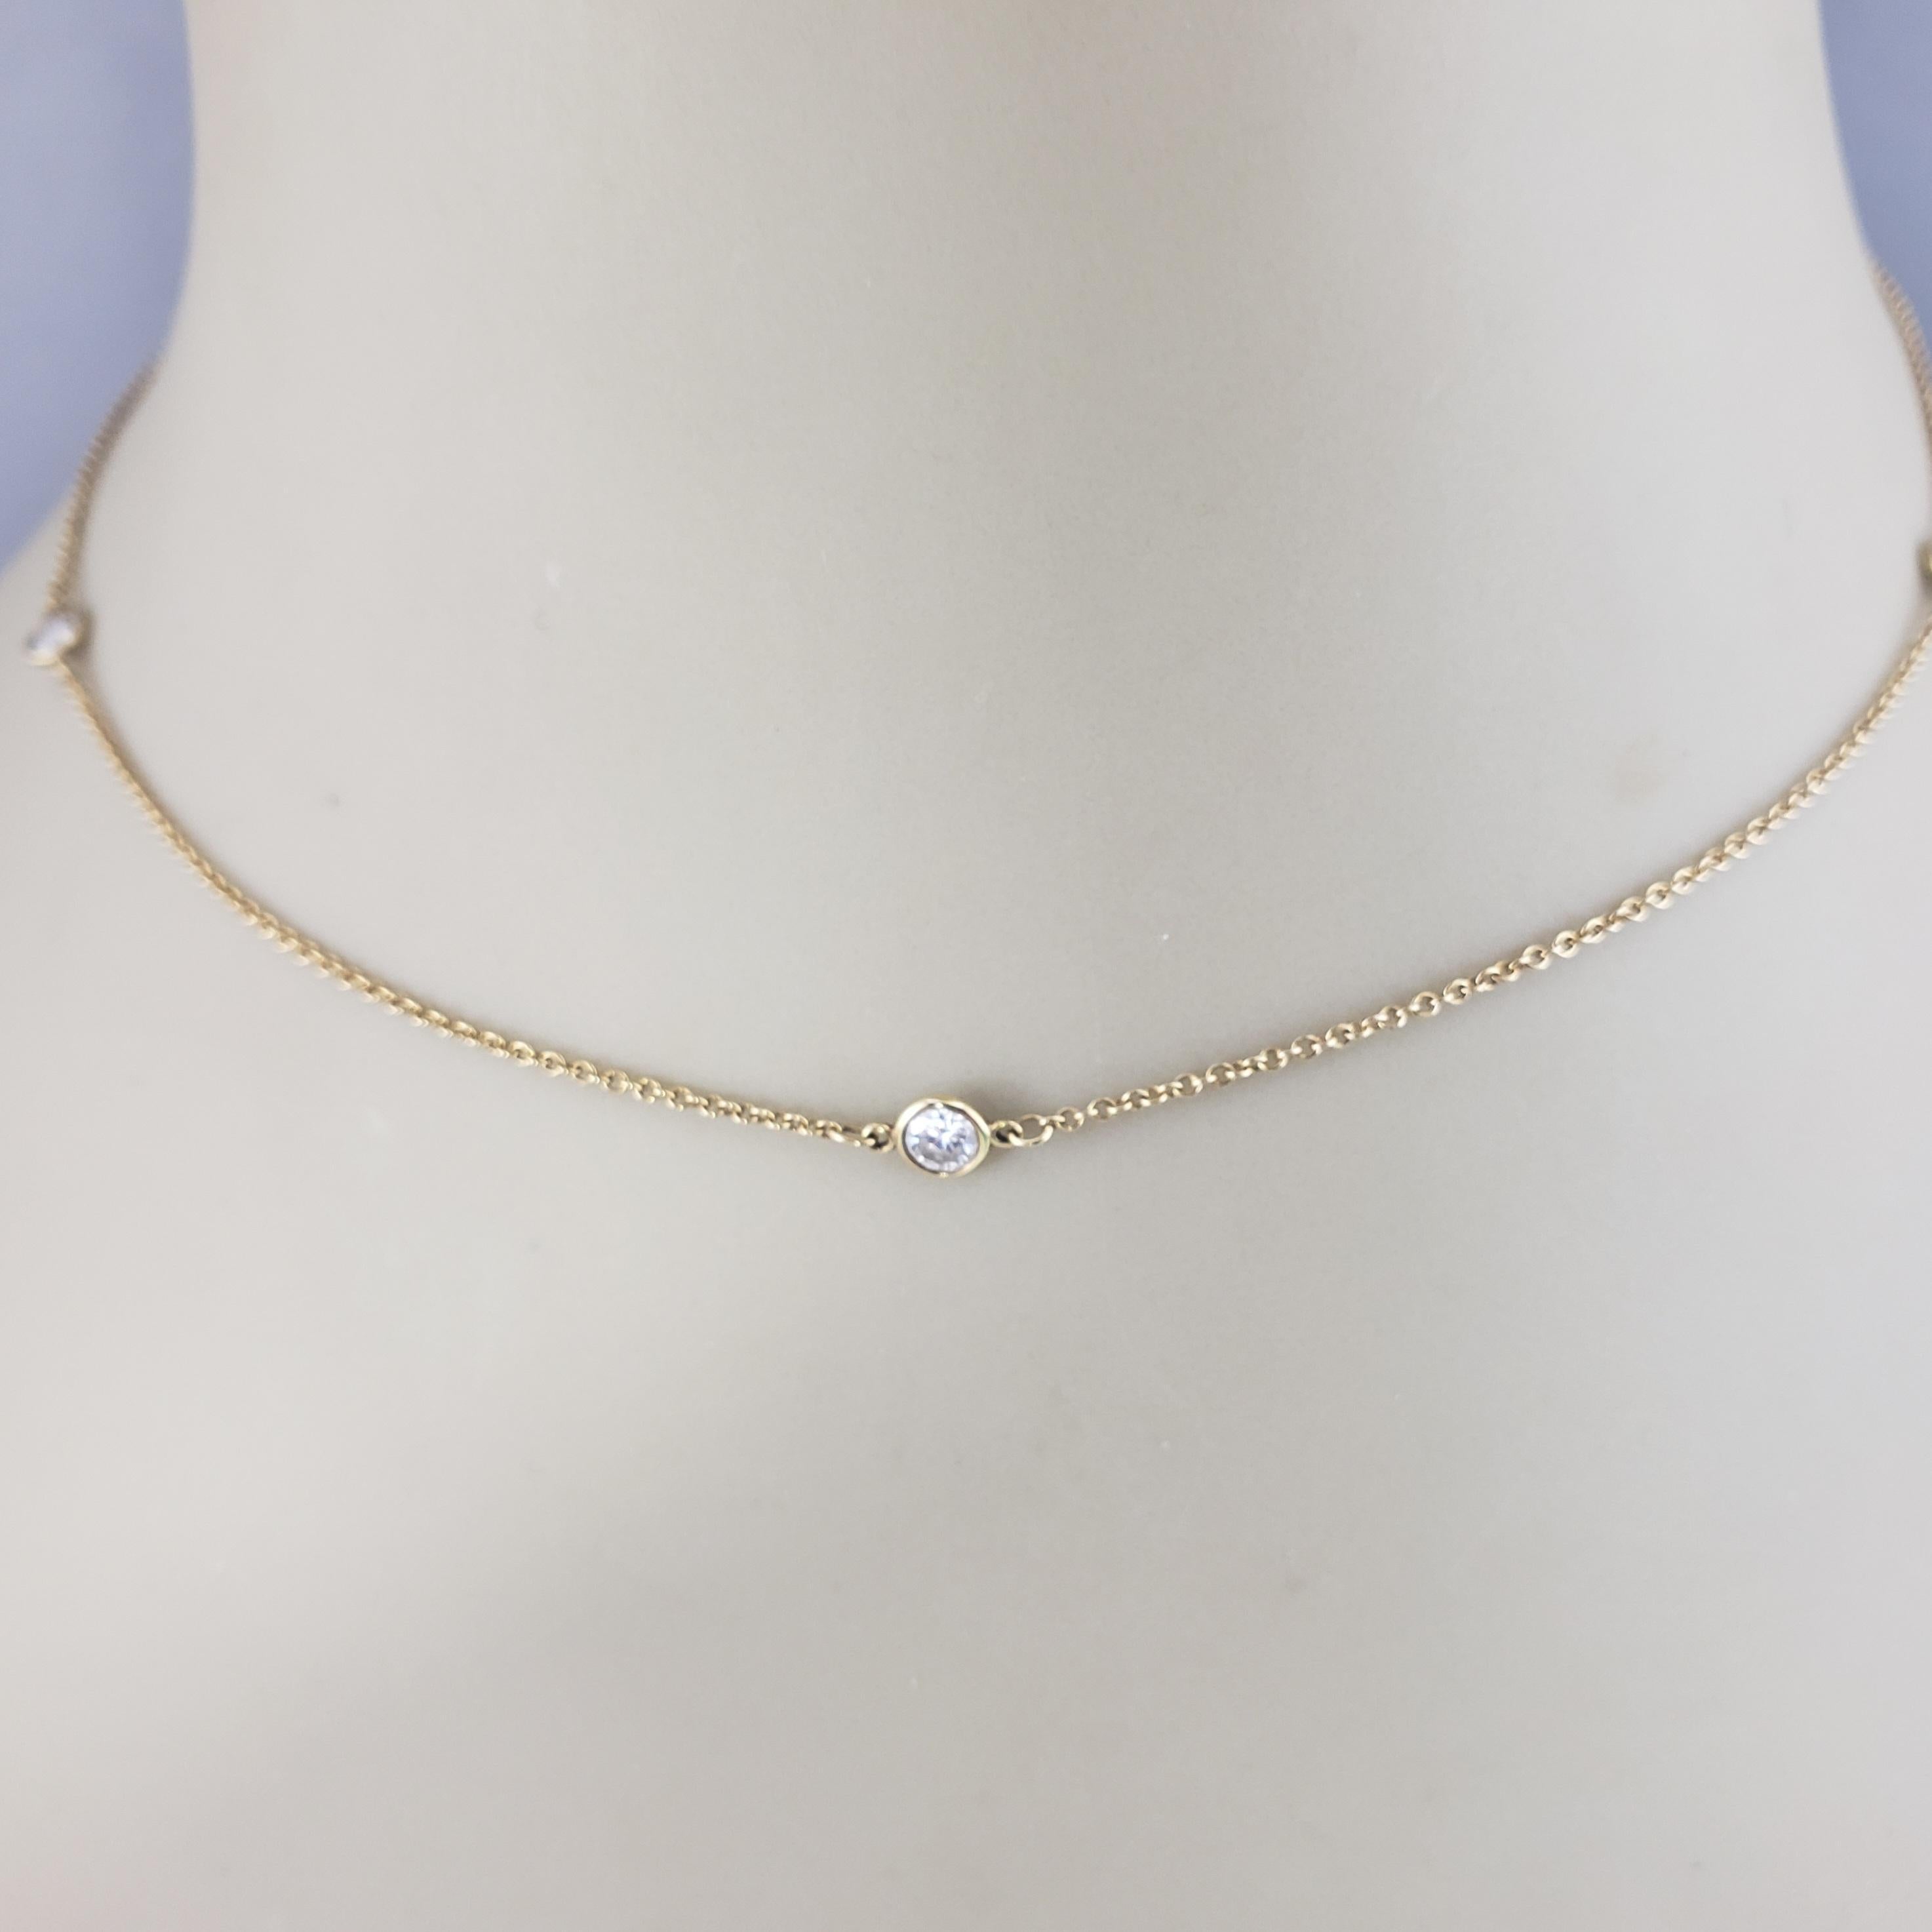 Tiffany & Co. Elsa Peretti 18K Yellow Gold Diamond By Yard Necklace #17056 For Sale 5